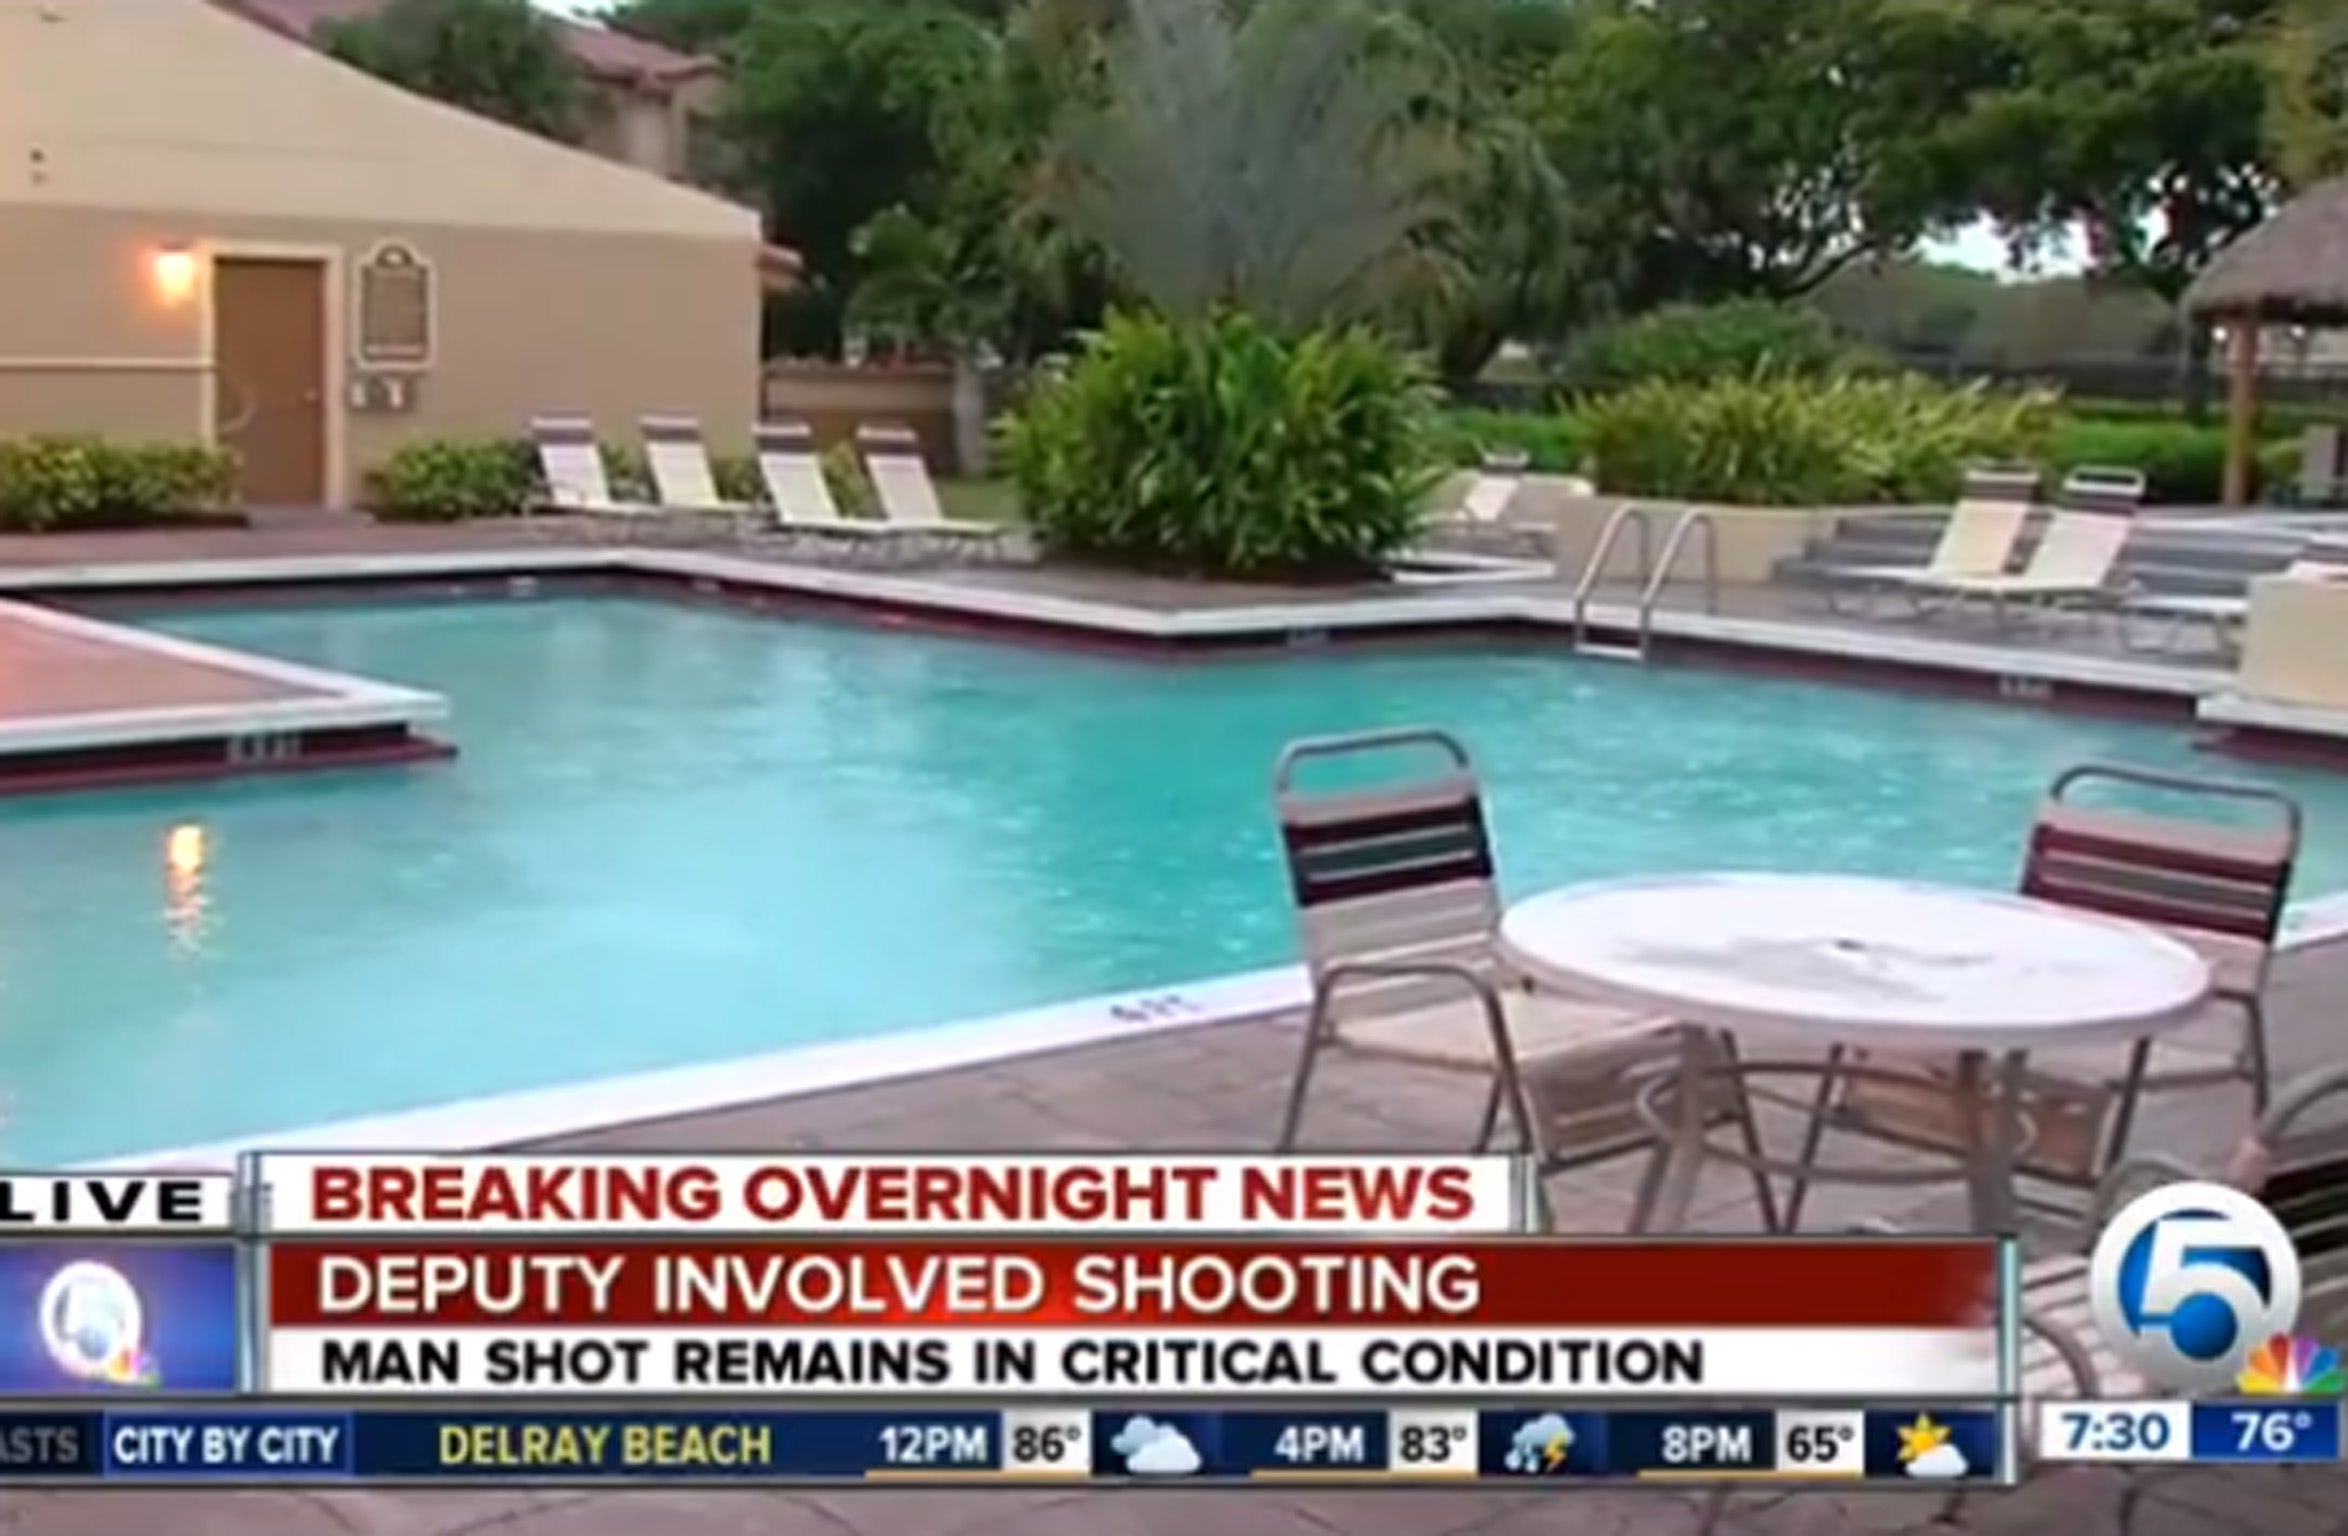 The incident happened in the private pool area of an apartment complex in Florida